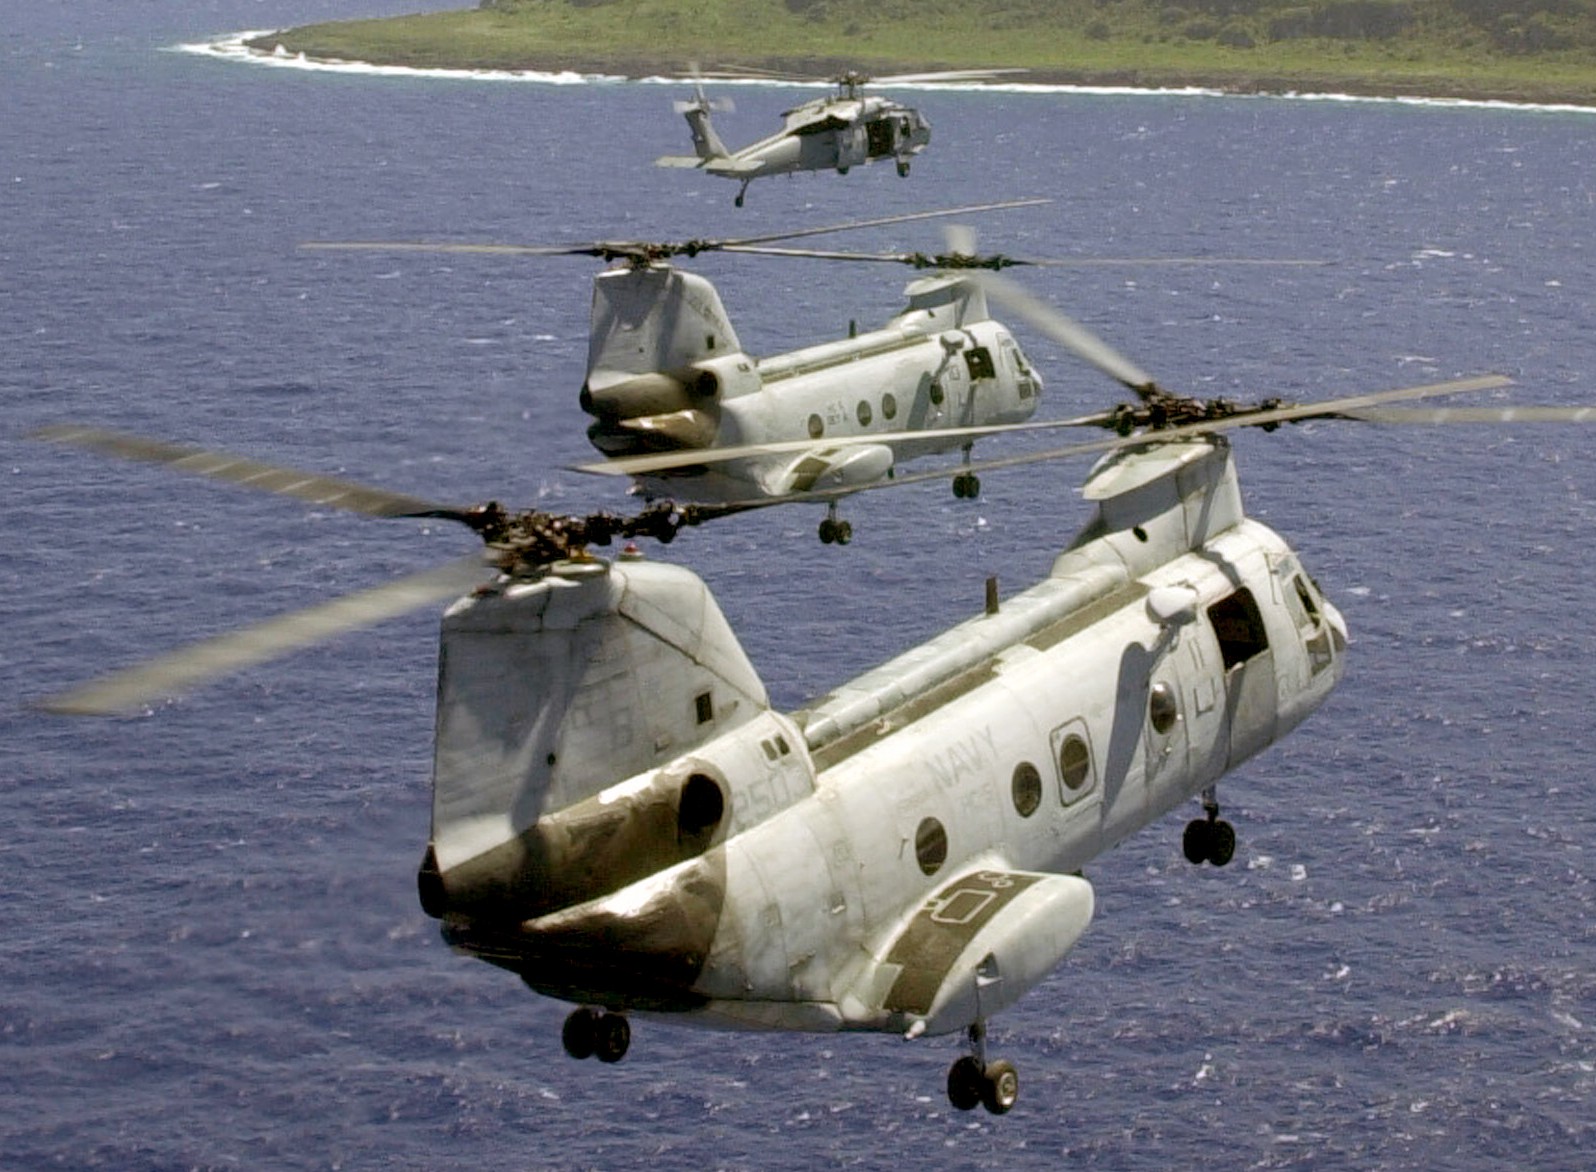 hc-5 providers helicopter combat support squadron navy hh-46d sea knight 75